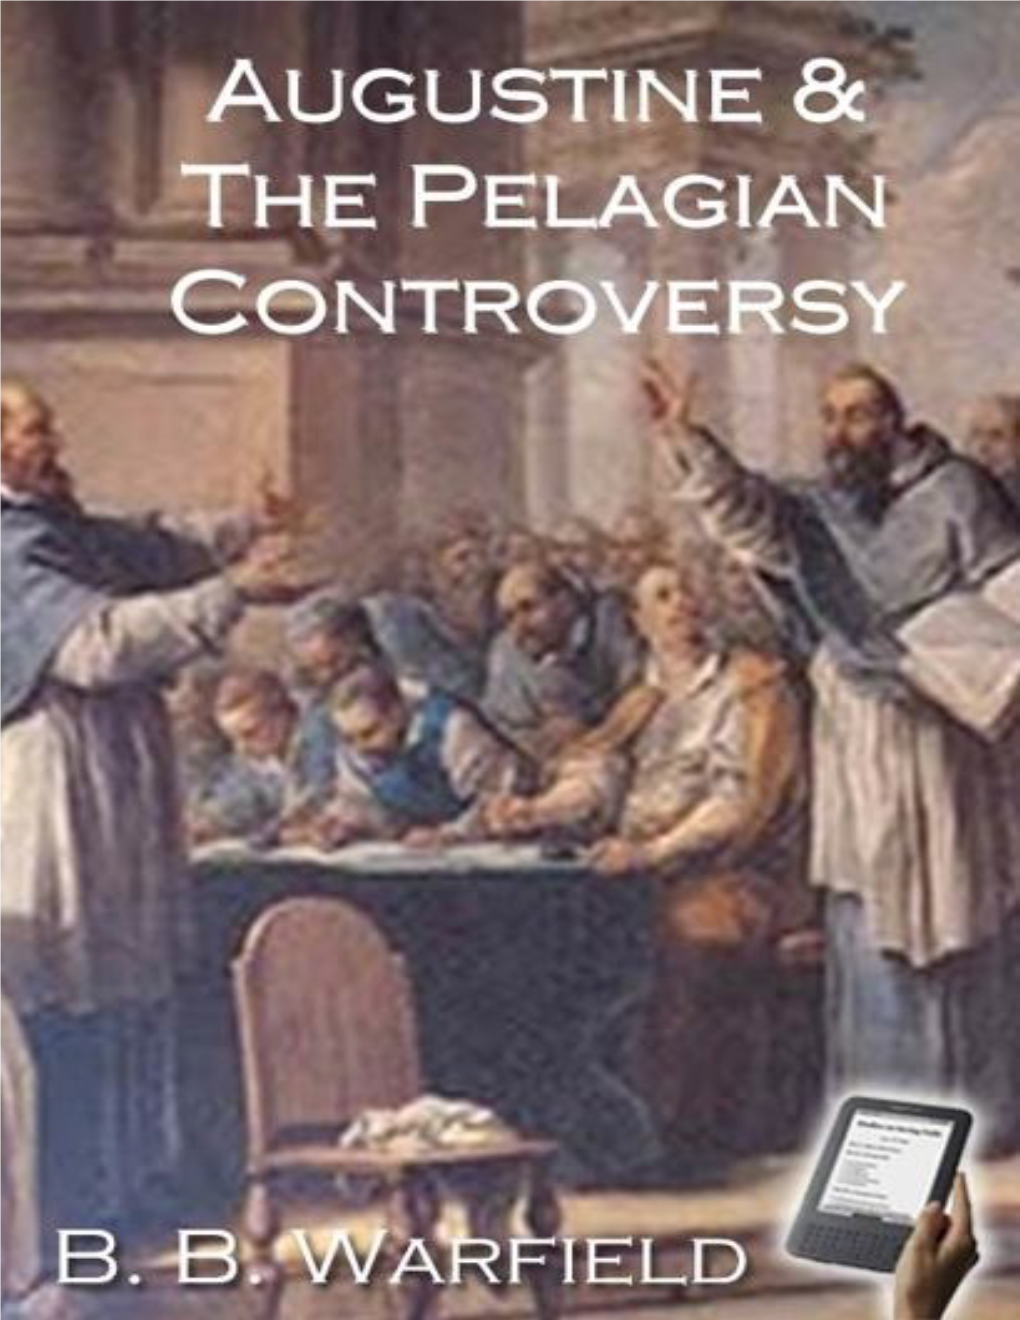 Augustine & the Pelagian Controversy